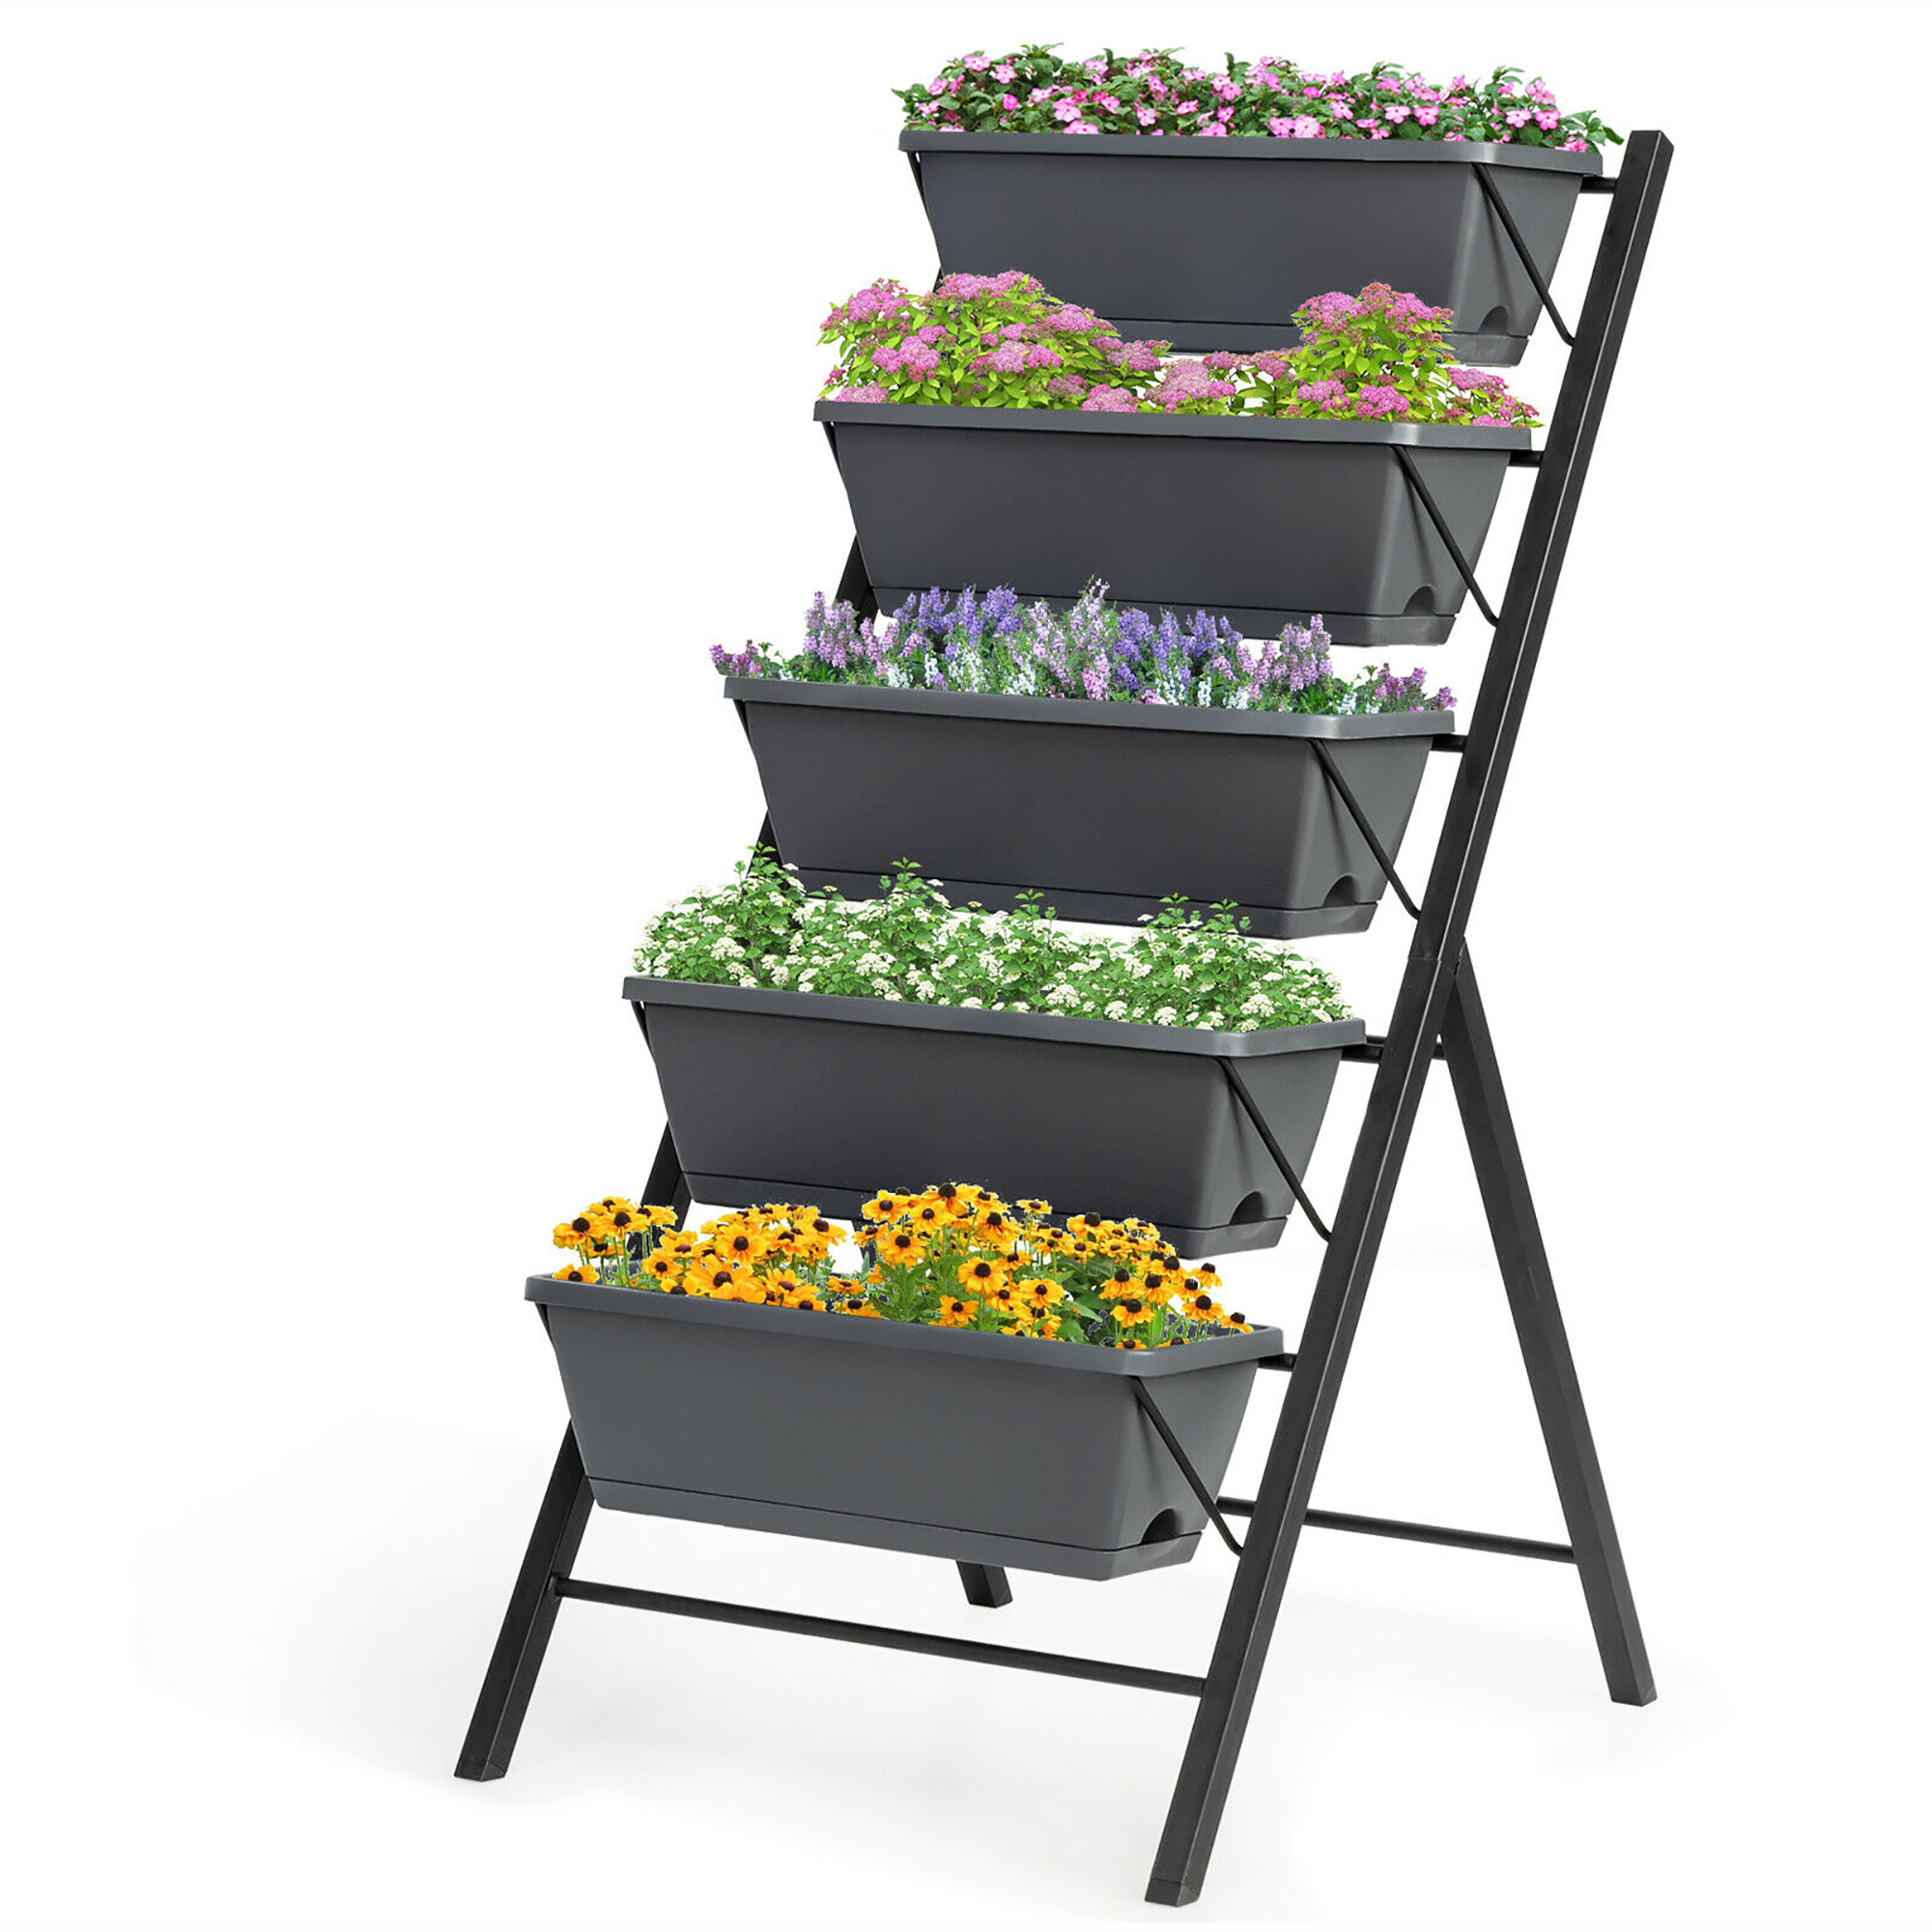 Costway 4 ft Vertical Raised Garden Bed 5-Tier Planter Box for Patio Balcony Flower Herb - image 1 of 10